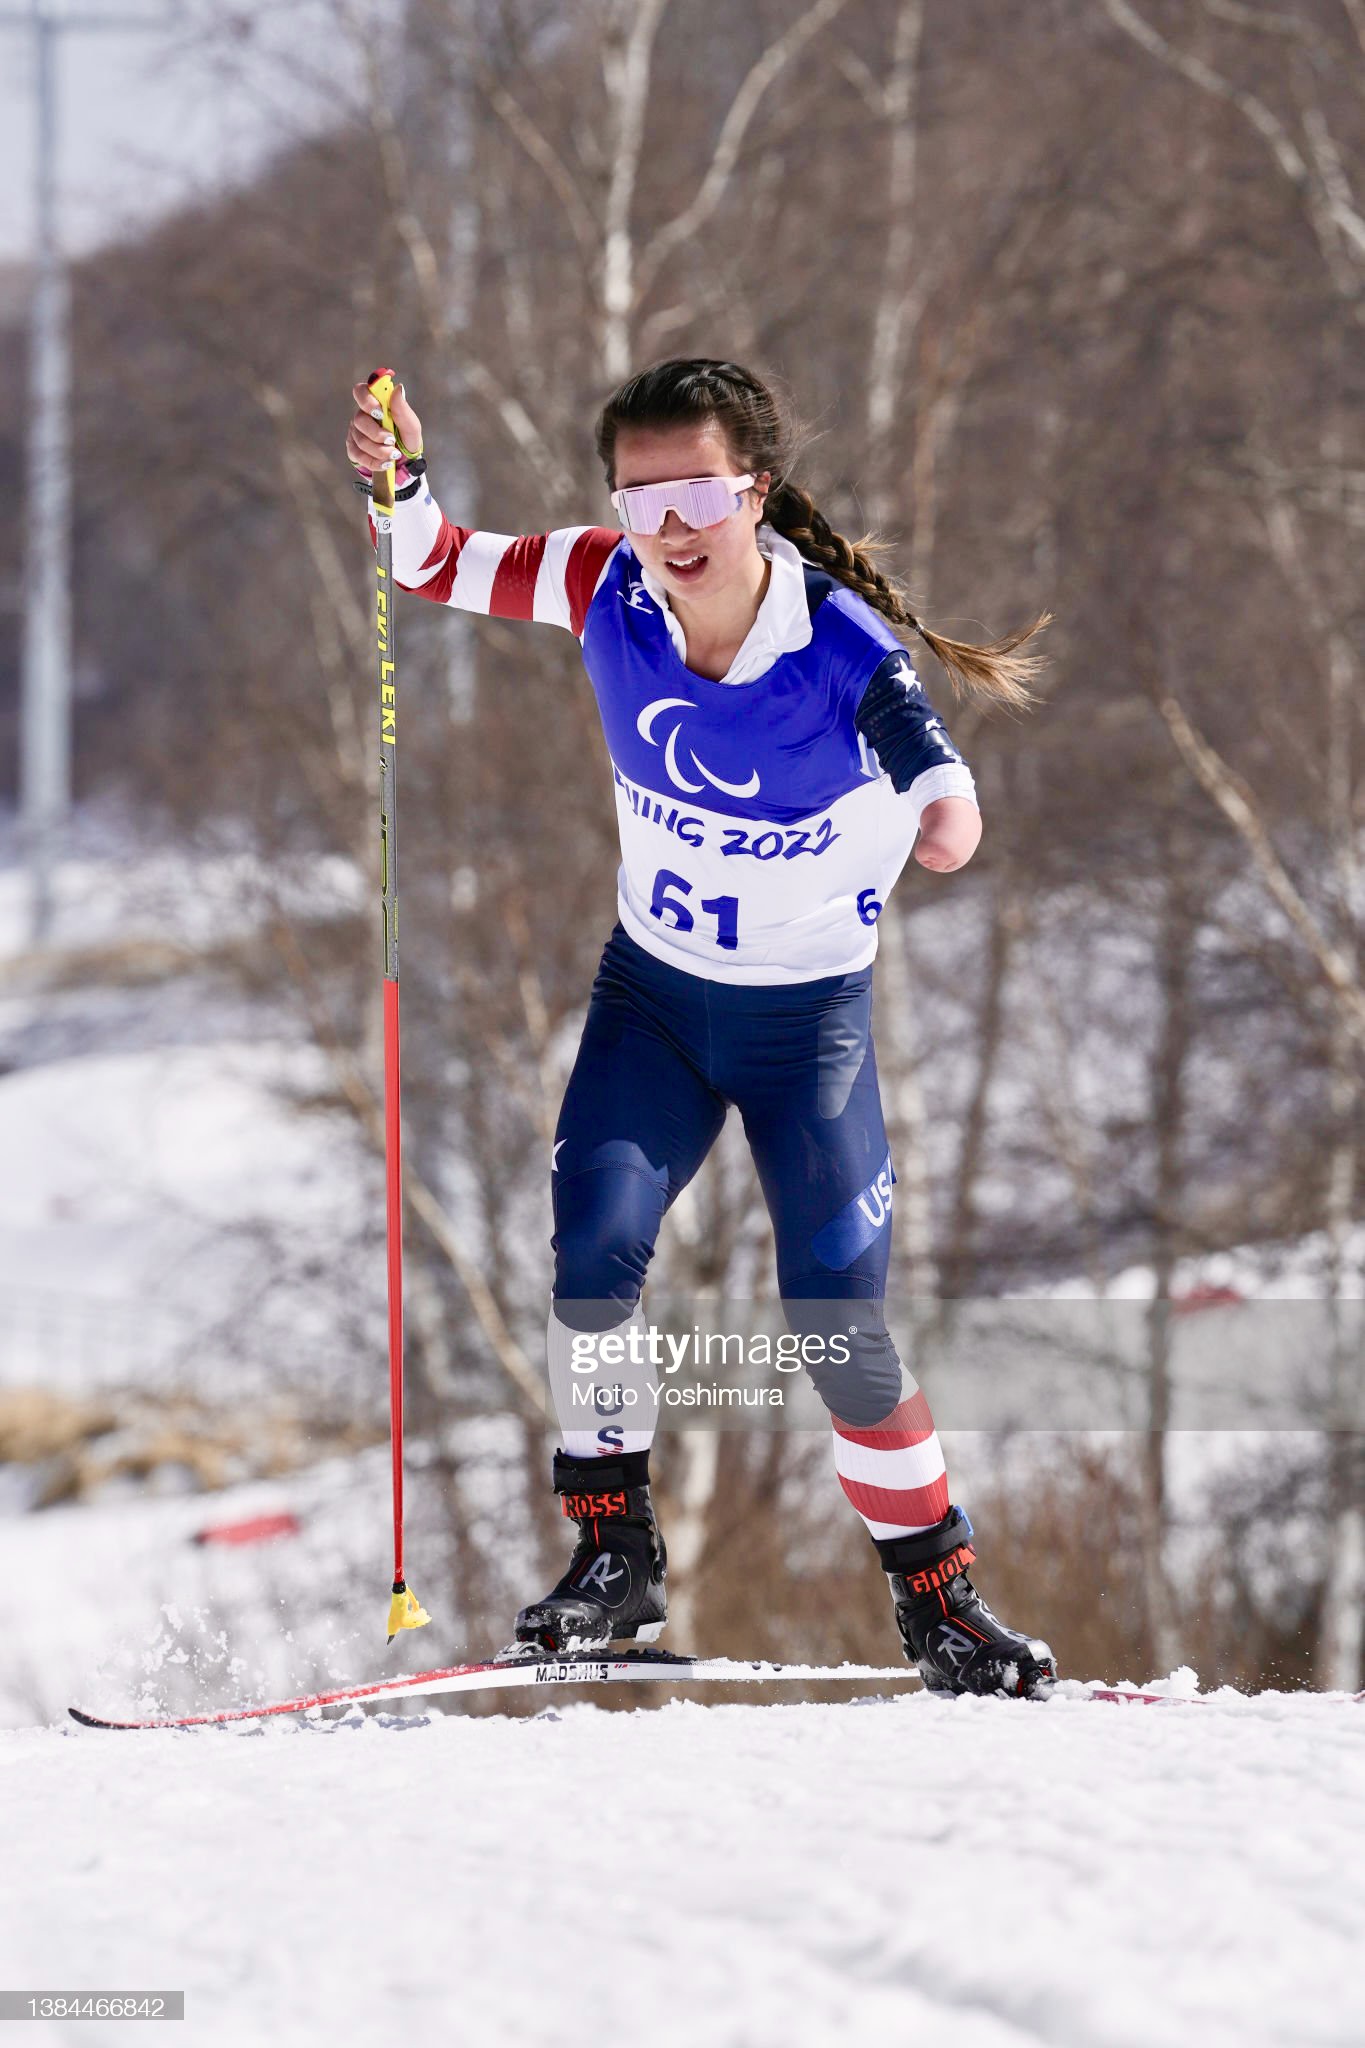 AAF recipient, Grace, in a USA jersey cross country skiing